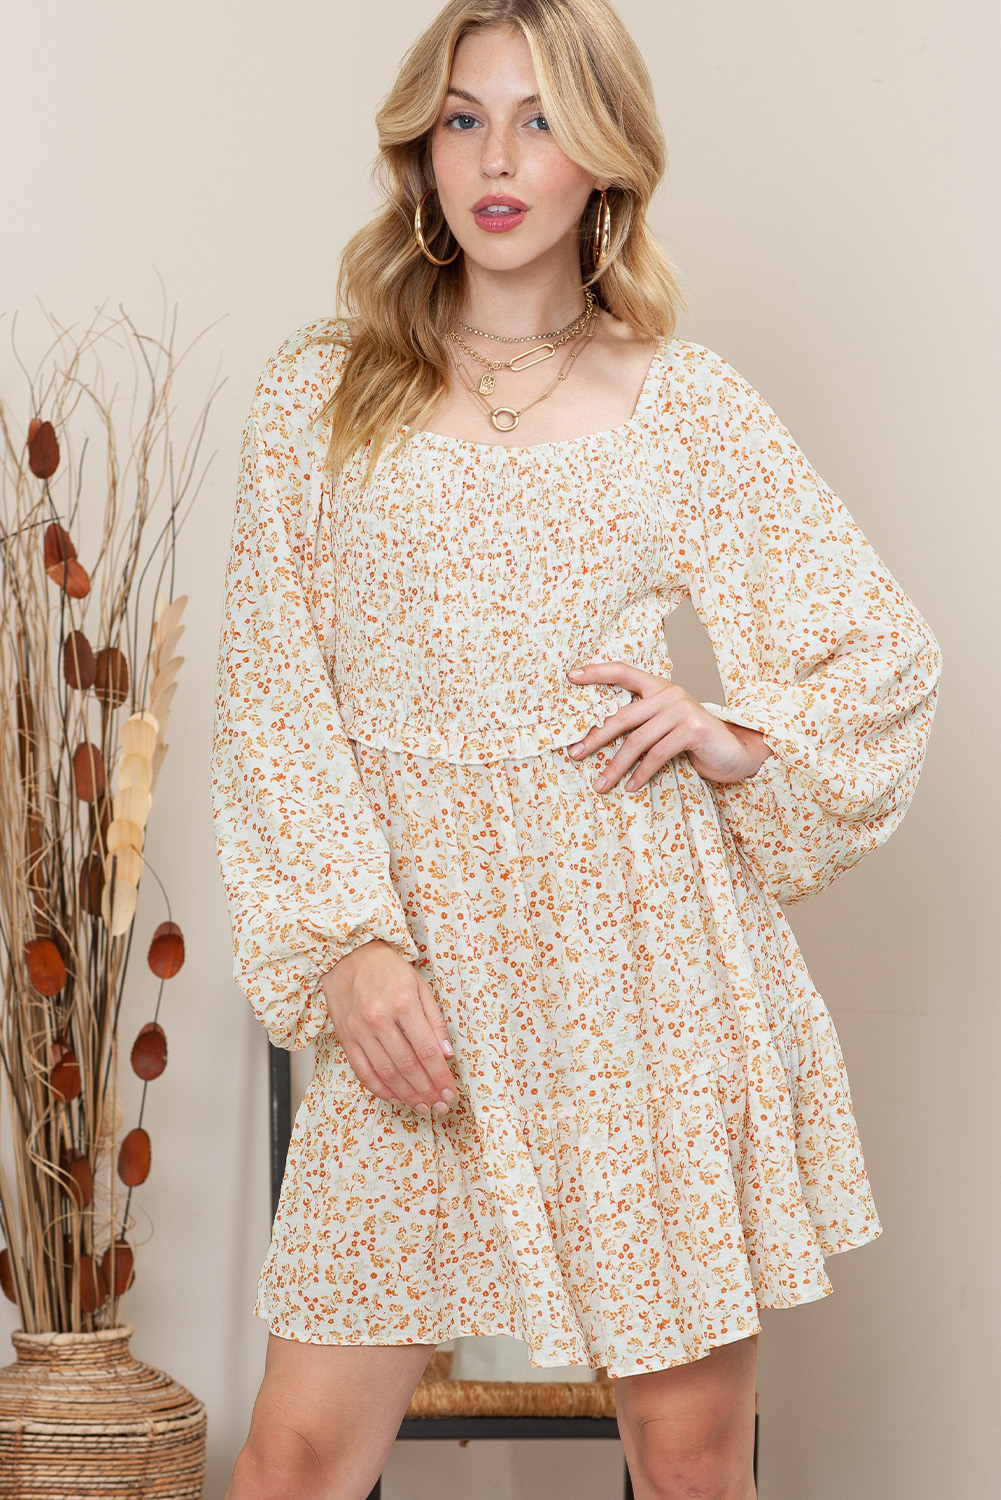 Shewin Wholesale Southern Apricot Boho Floral Smocked Puff Sleeve SHORT Dress